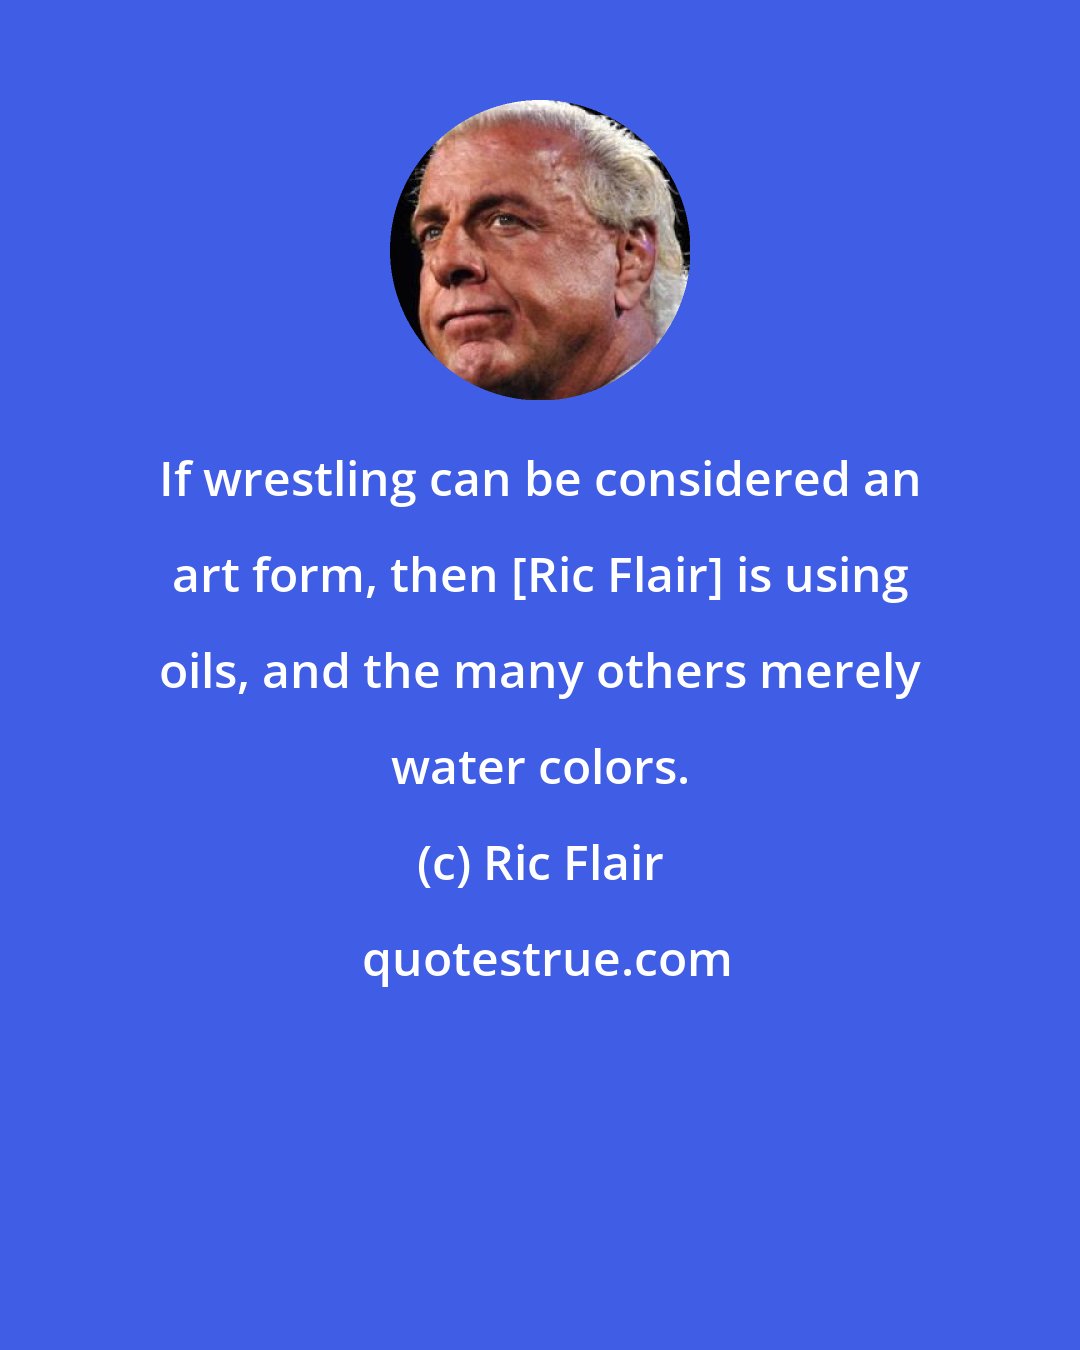 Ric Flair: If wrestling can be considered an art form, then [Ric Flair] is using oils, and the many others merely water colors.